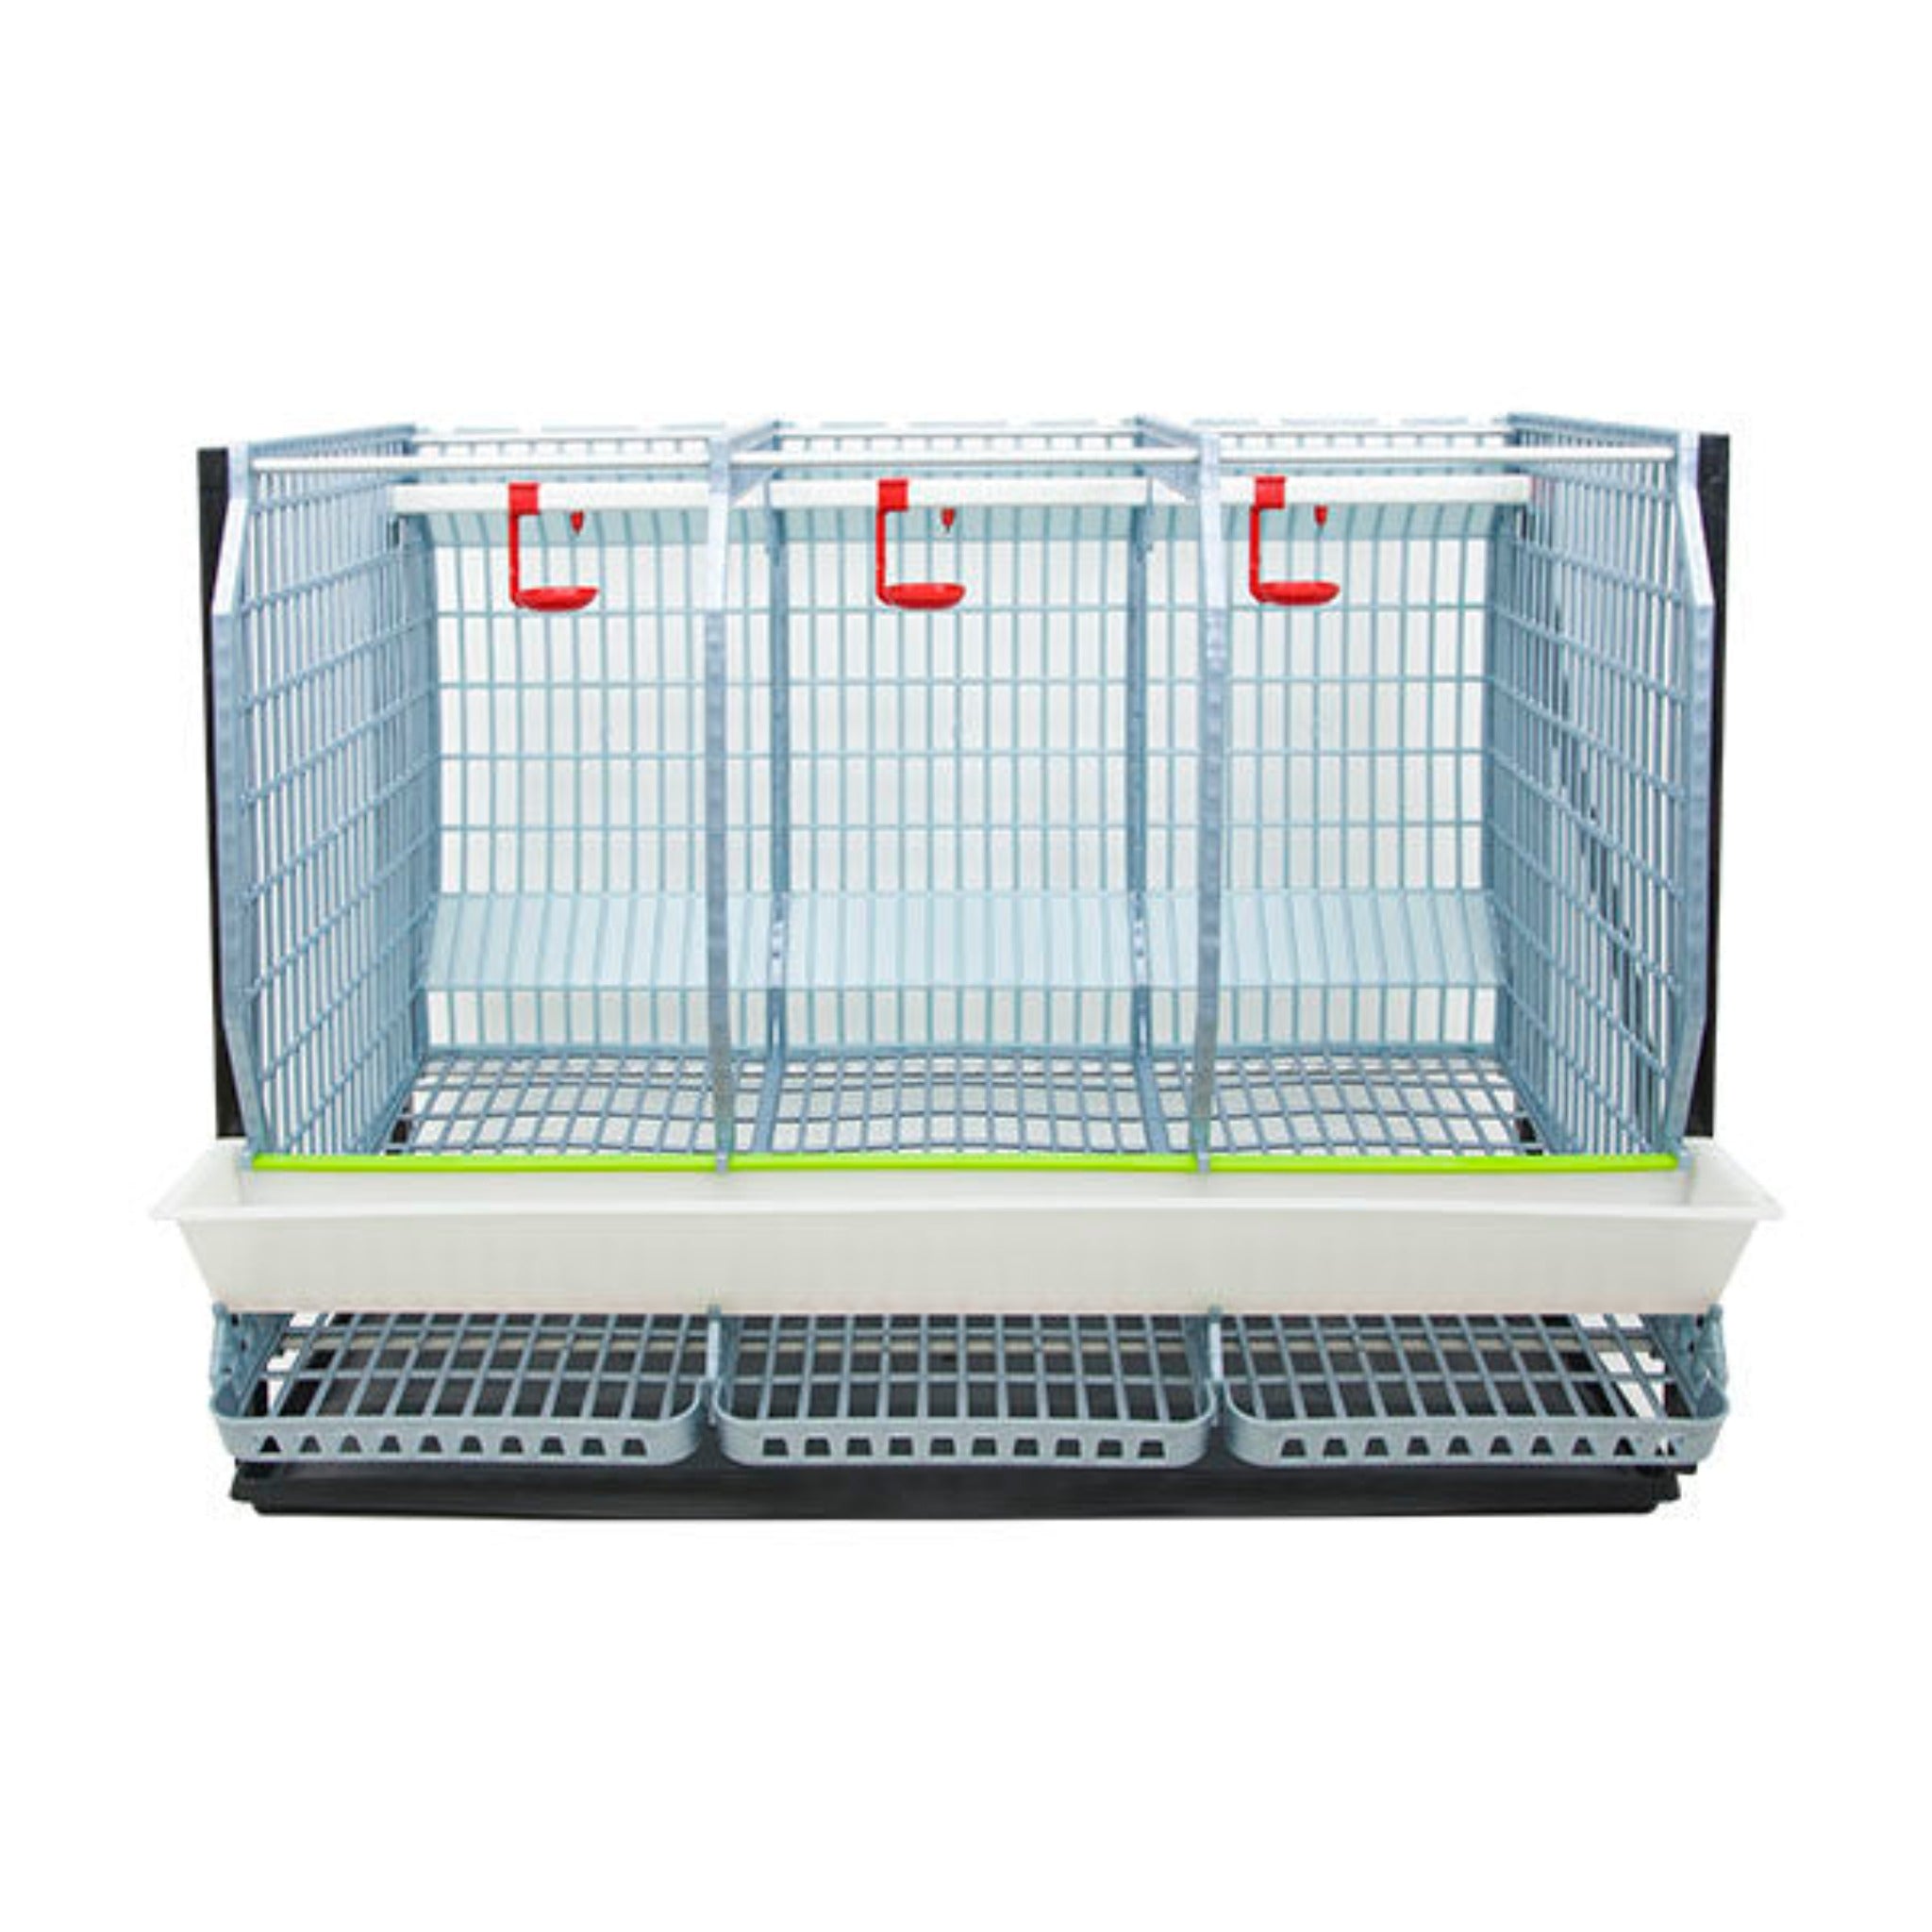 Hatching Time Cimuka. TYK60 22” Chicken cage 1 layer. Image shows chicken cage from front. Roof and front walls are removed to show inside of cage. Roll out egg trays can be seen on front under feeding trough. Automatic drinker system is seen on back wall of cage.